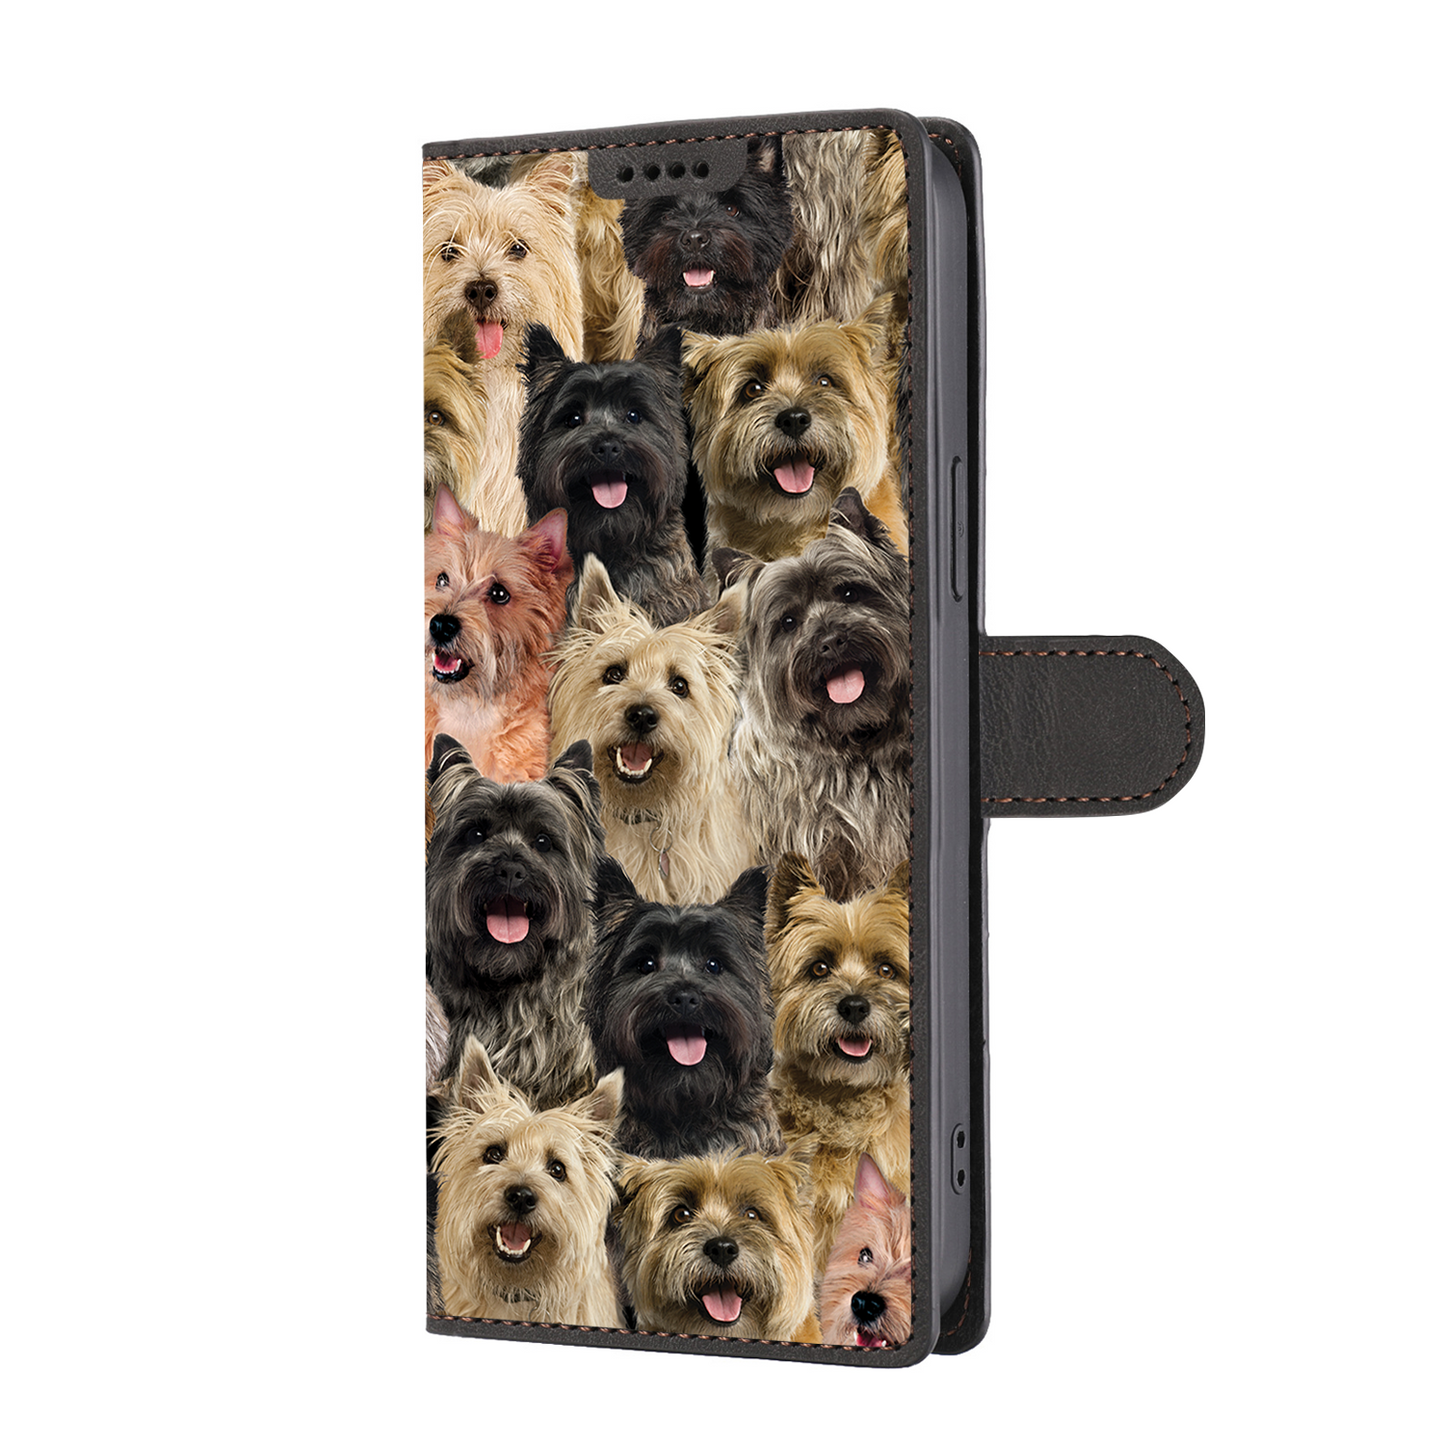 You Will Have A Bunch Of Cairn Terriers - Wallet Case